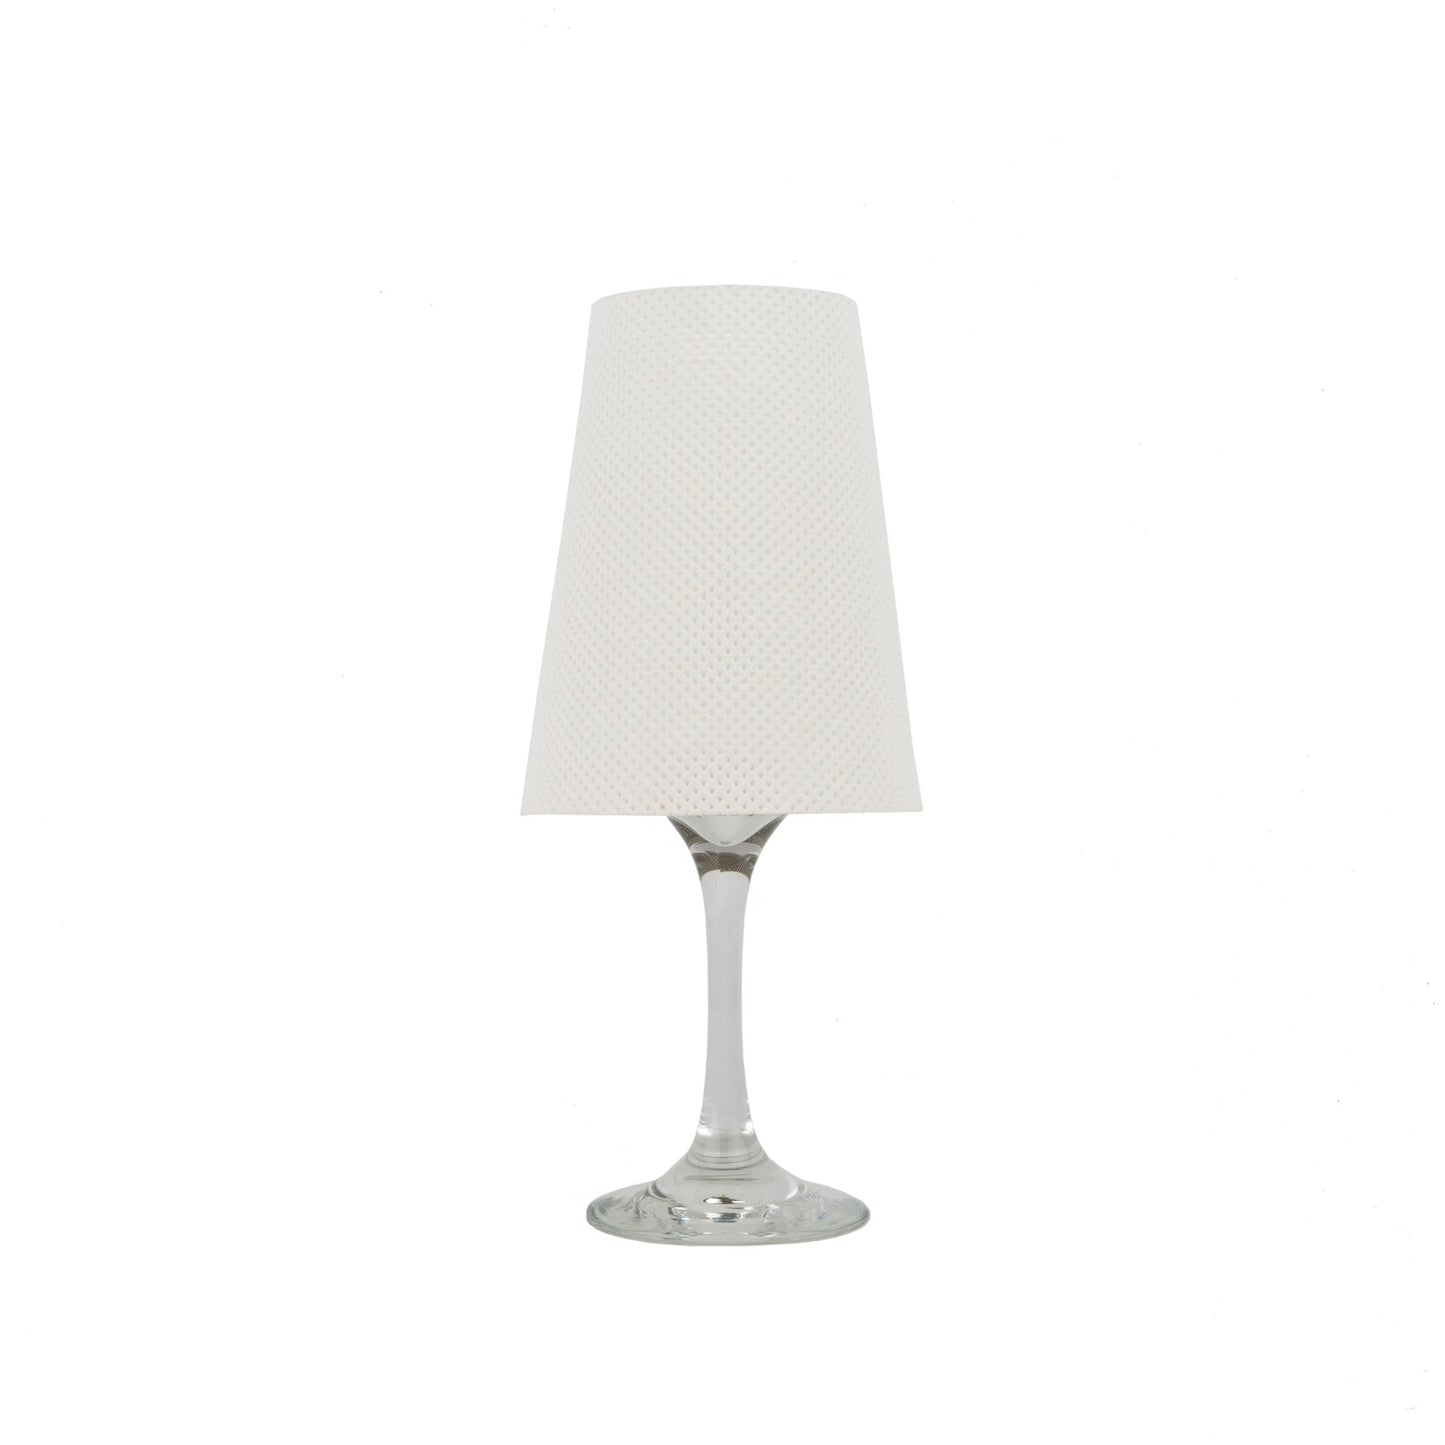 A white washable paper lampshade is shown sitting atop a wine glass.